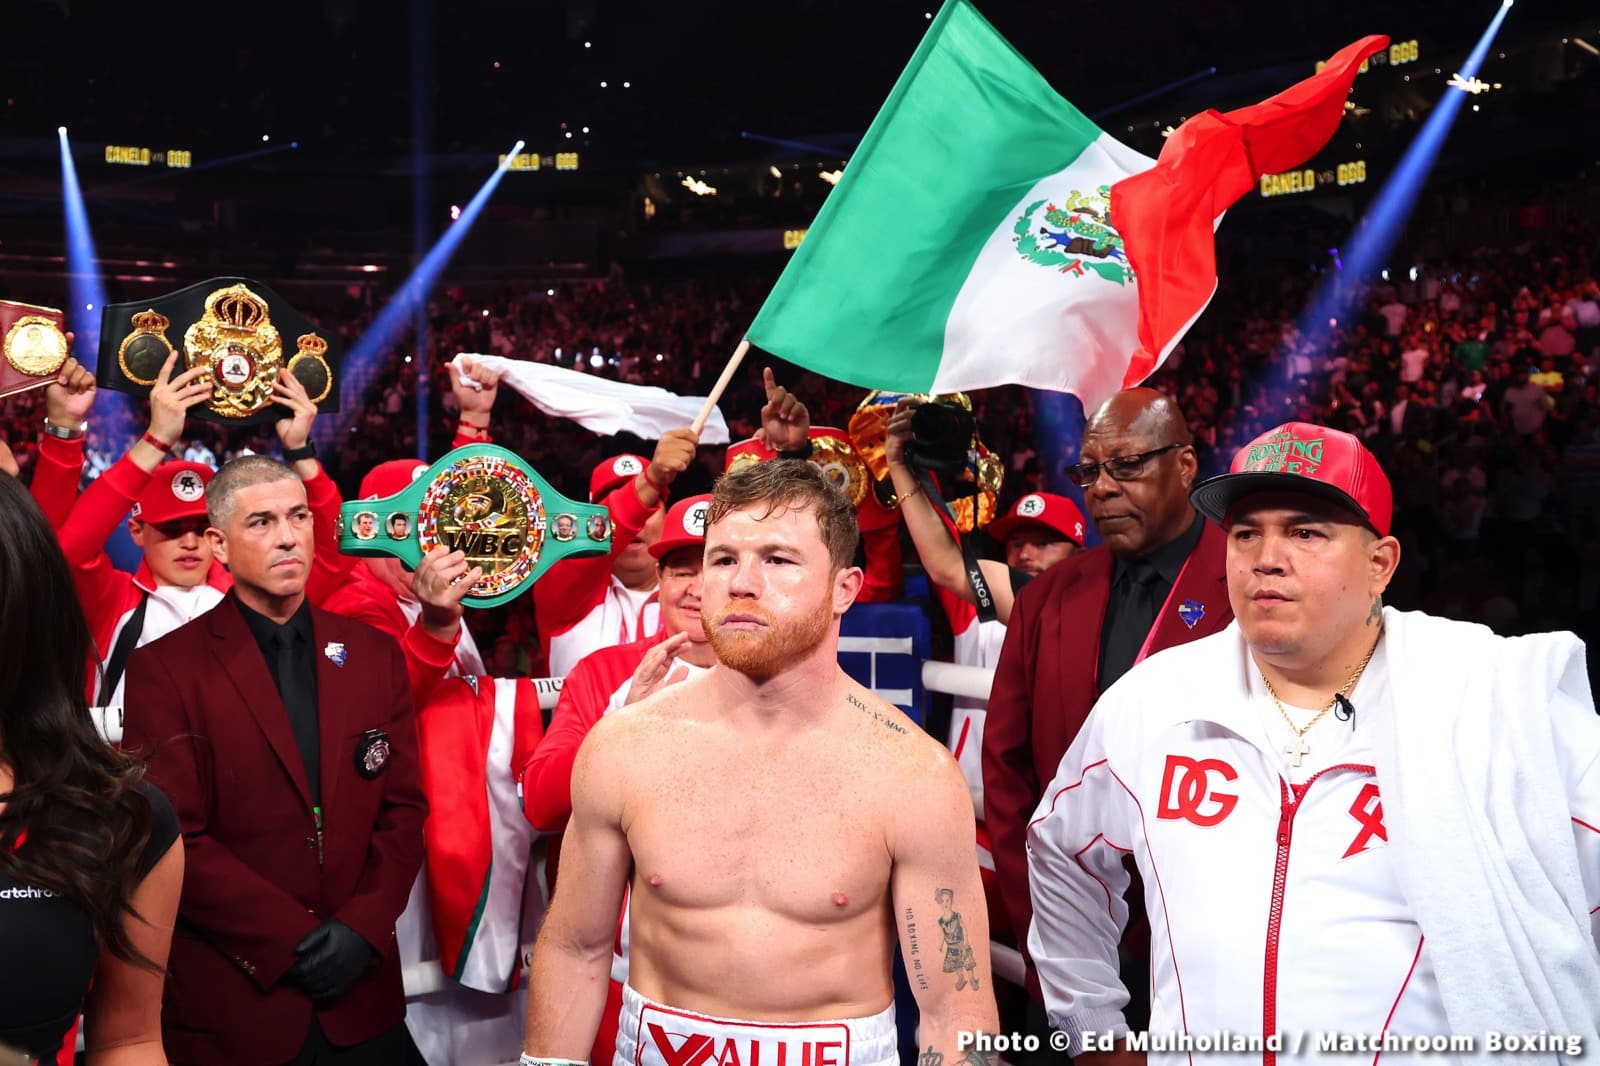 Canelo “Threatens” Football Star Lionel Messi For “Disrespect”